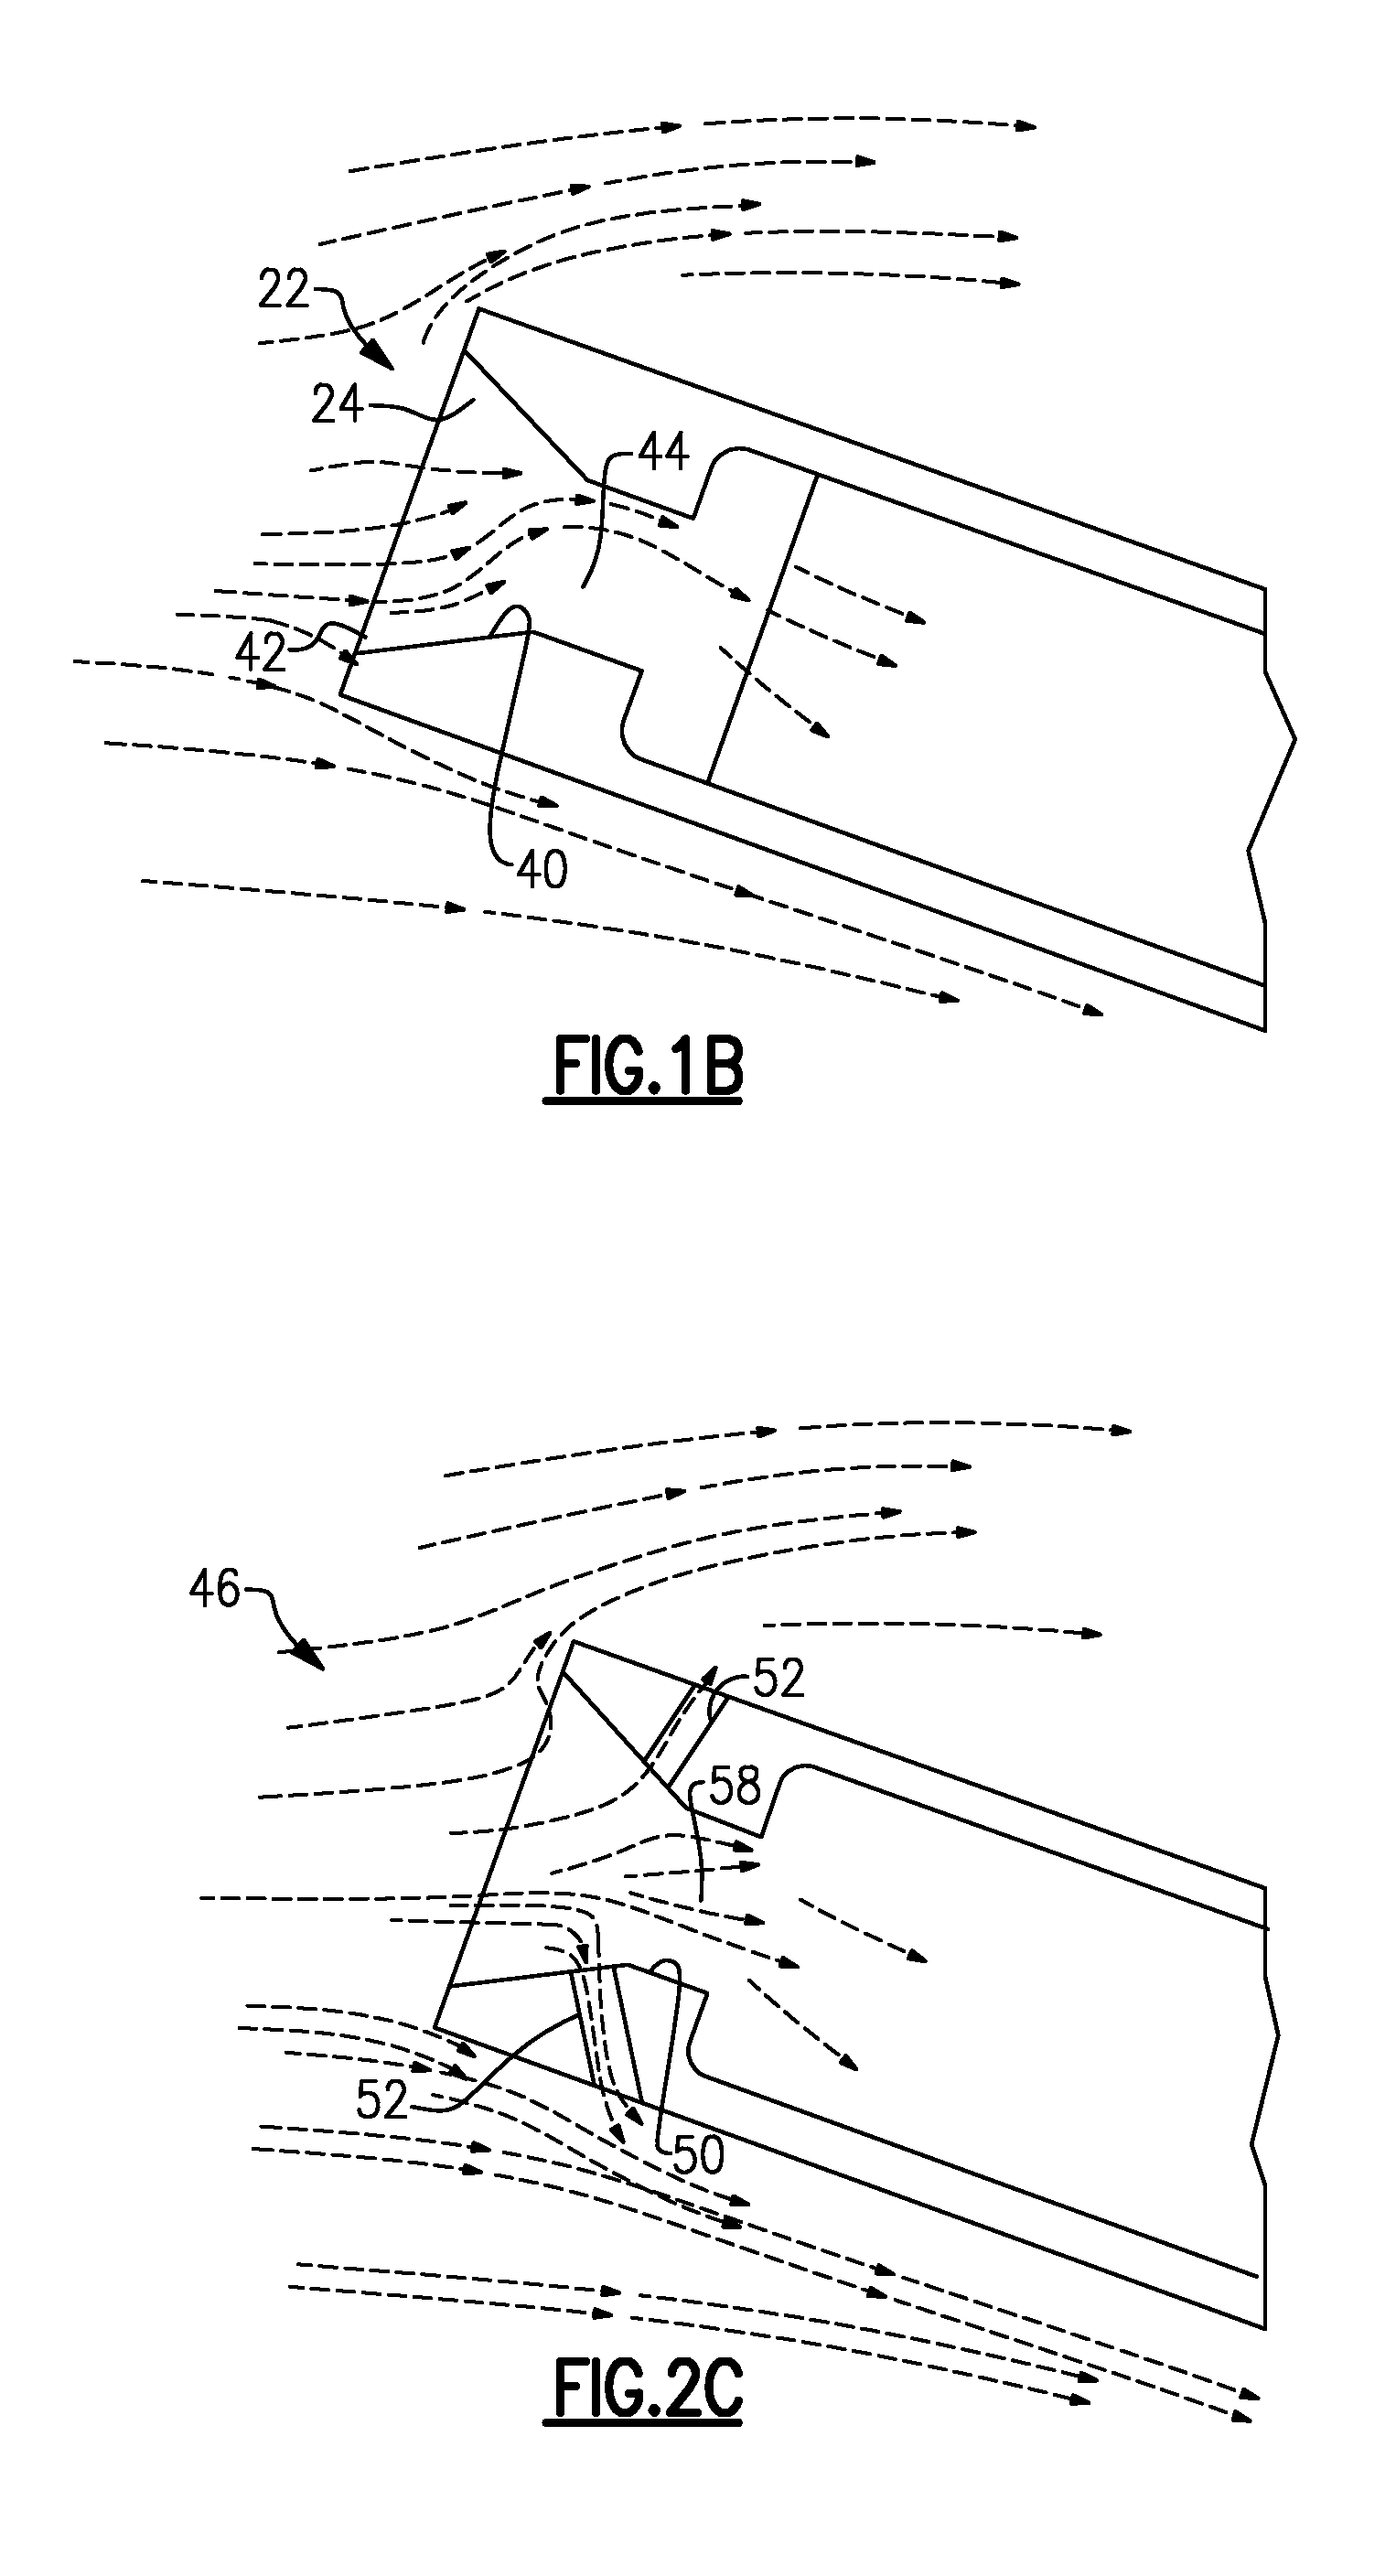 Air Data Probe With Improved Performance at Angle of Attack Operation